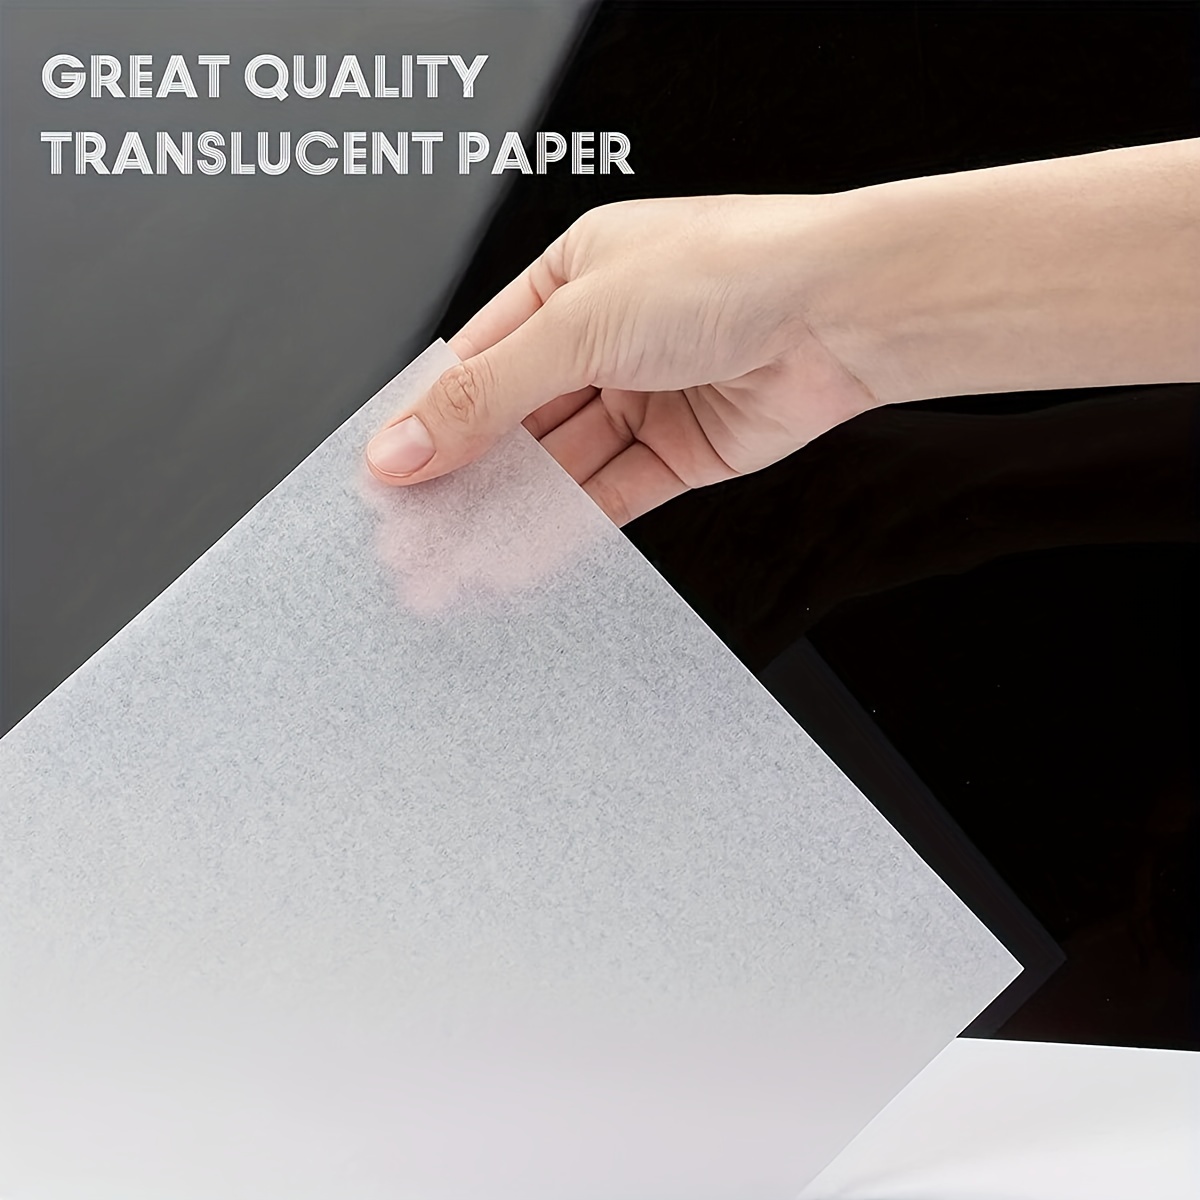 Vellum Paper, Cridoz 50 Sheets Vellum Transparent Paper 8.5 x 11 Inches  Translucent Clear Paper for Printing Sketching Tracing Drawing Animation